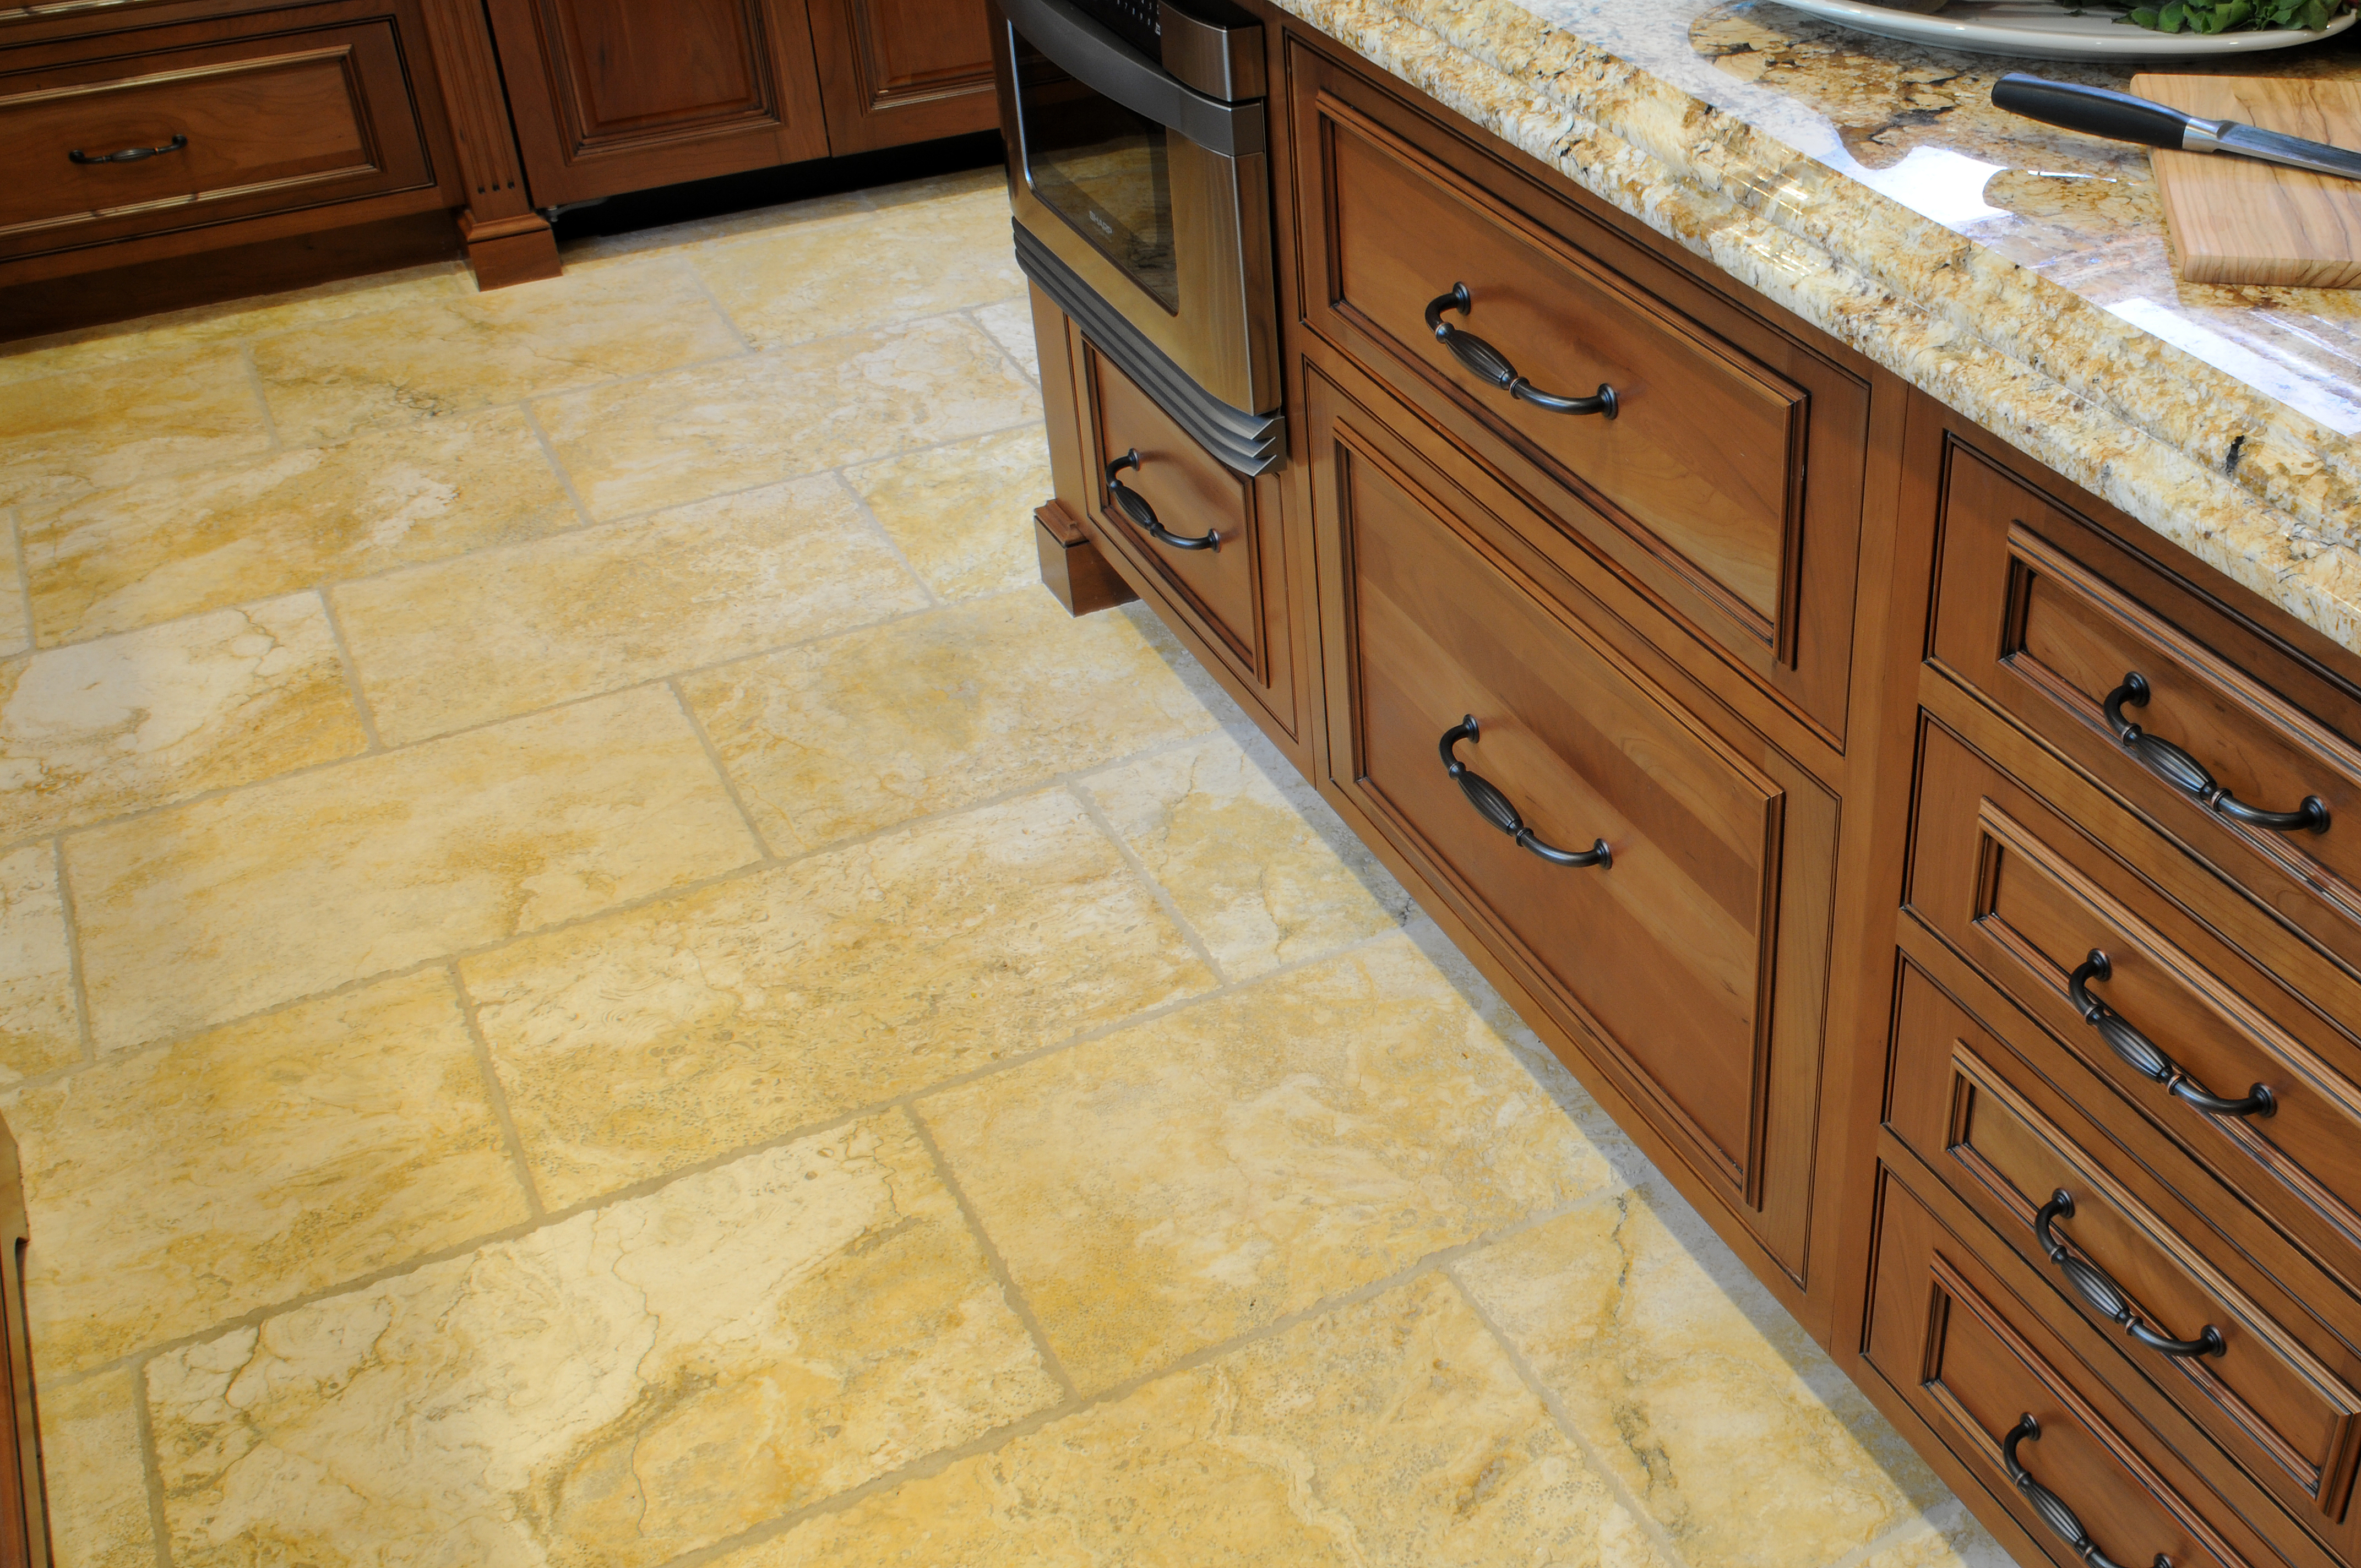 Kitchen Stone Flooring (Ratings, Reviews)